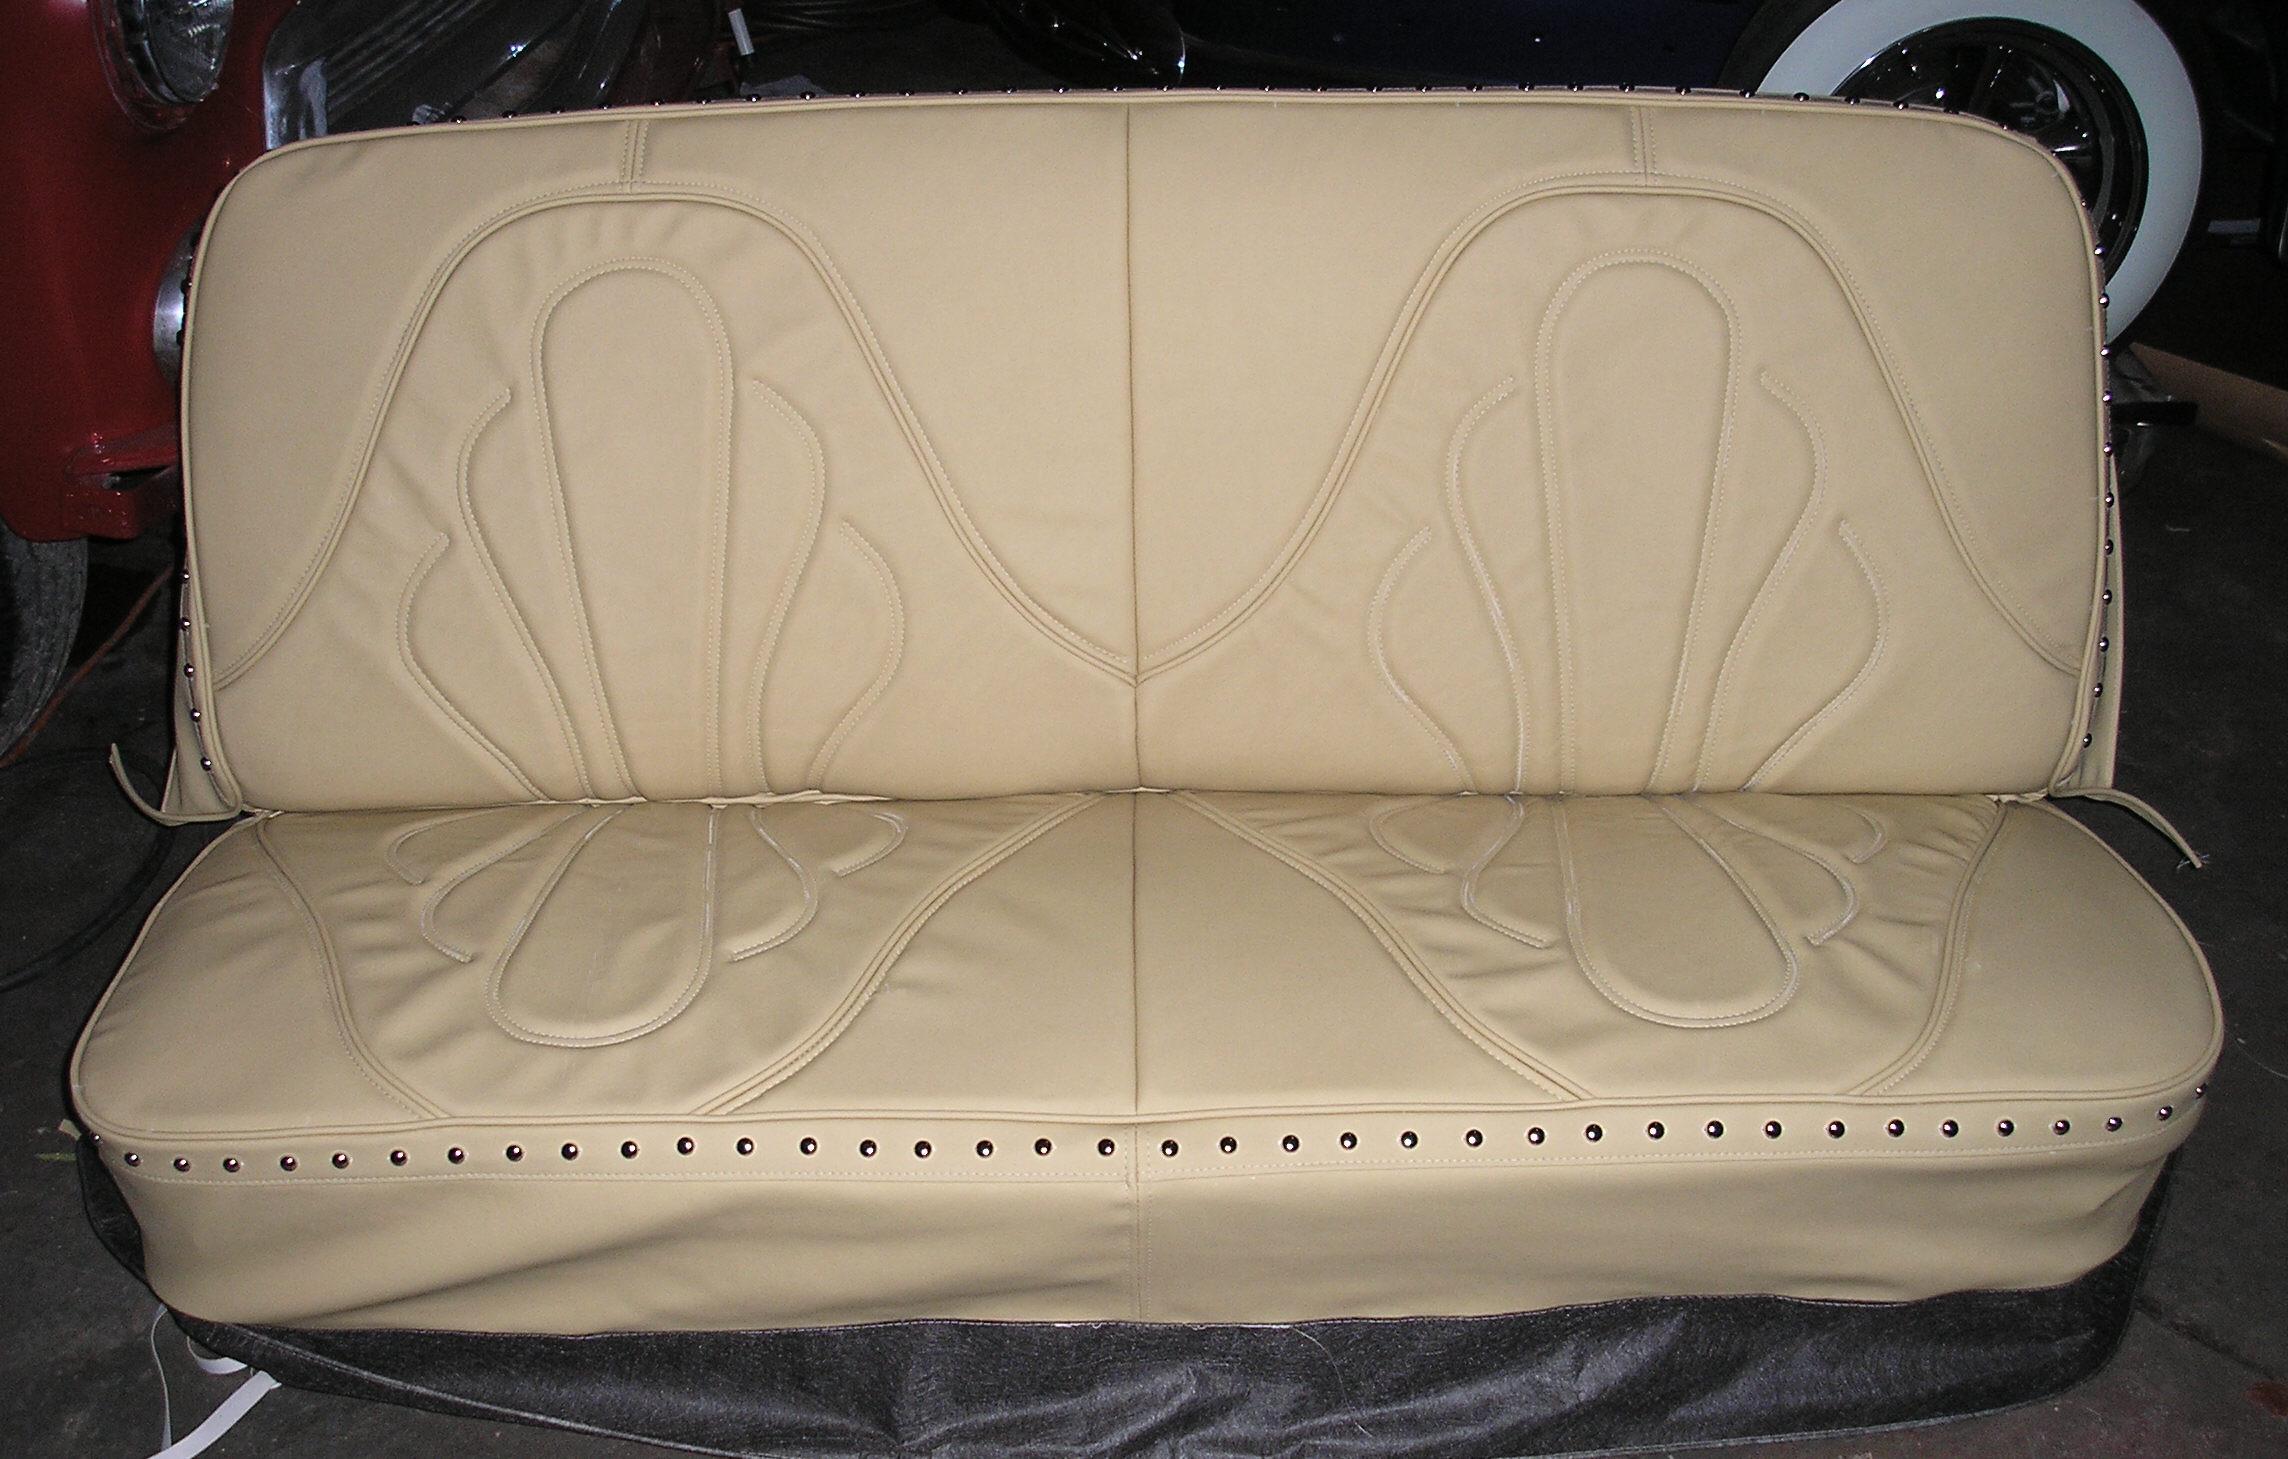 60-87 Truck seat cover